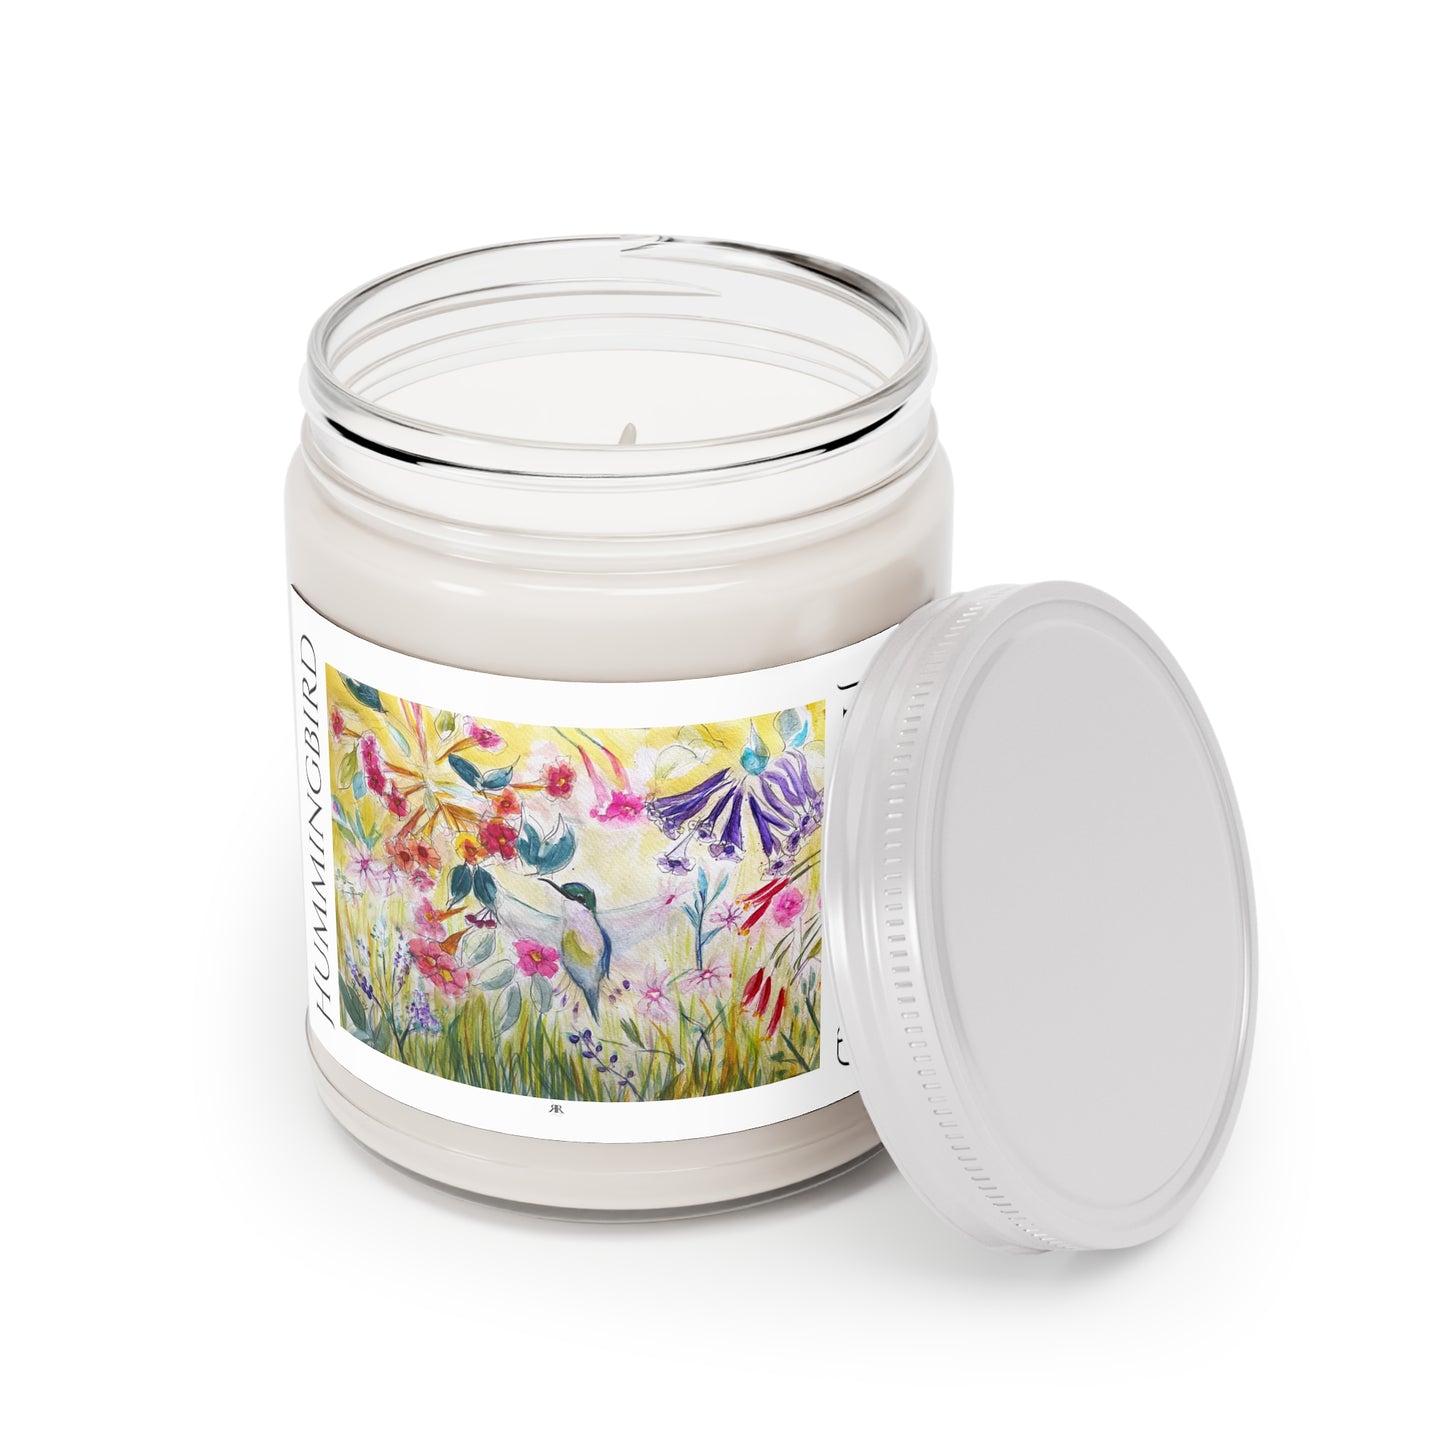 Hummingbird in a Tube Flower Garden #2 Scented Candle 9oz